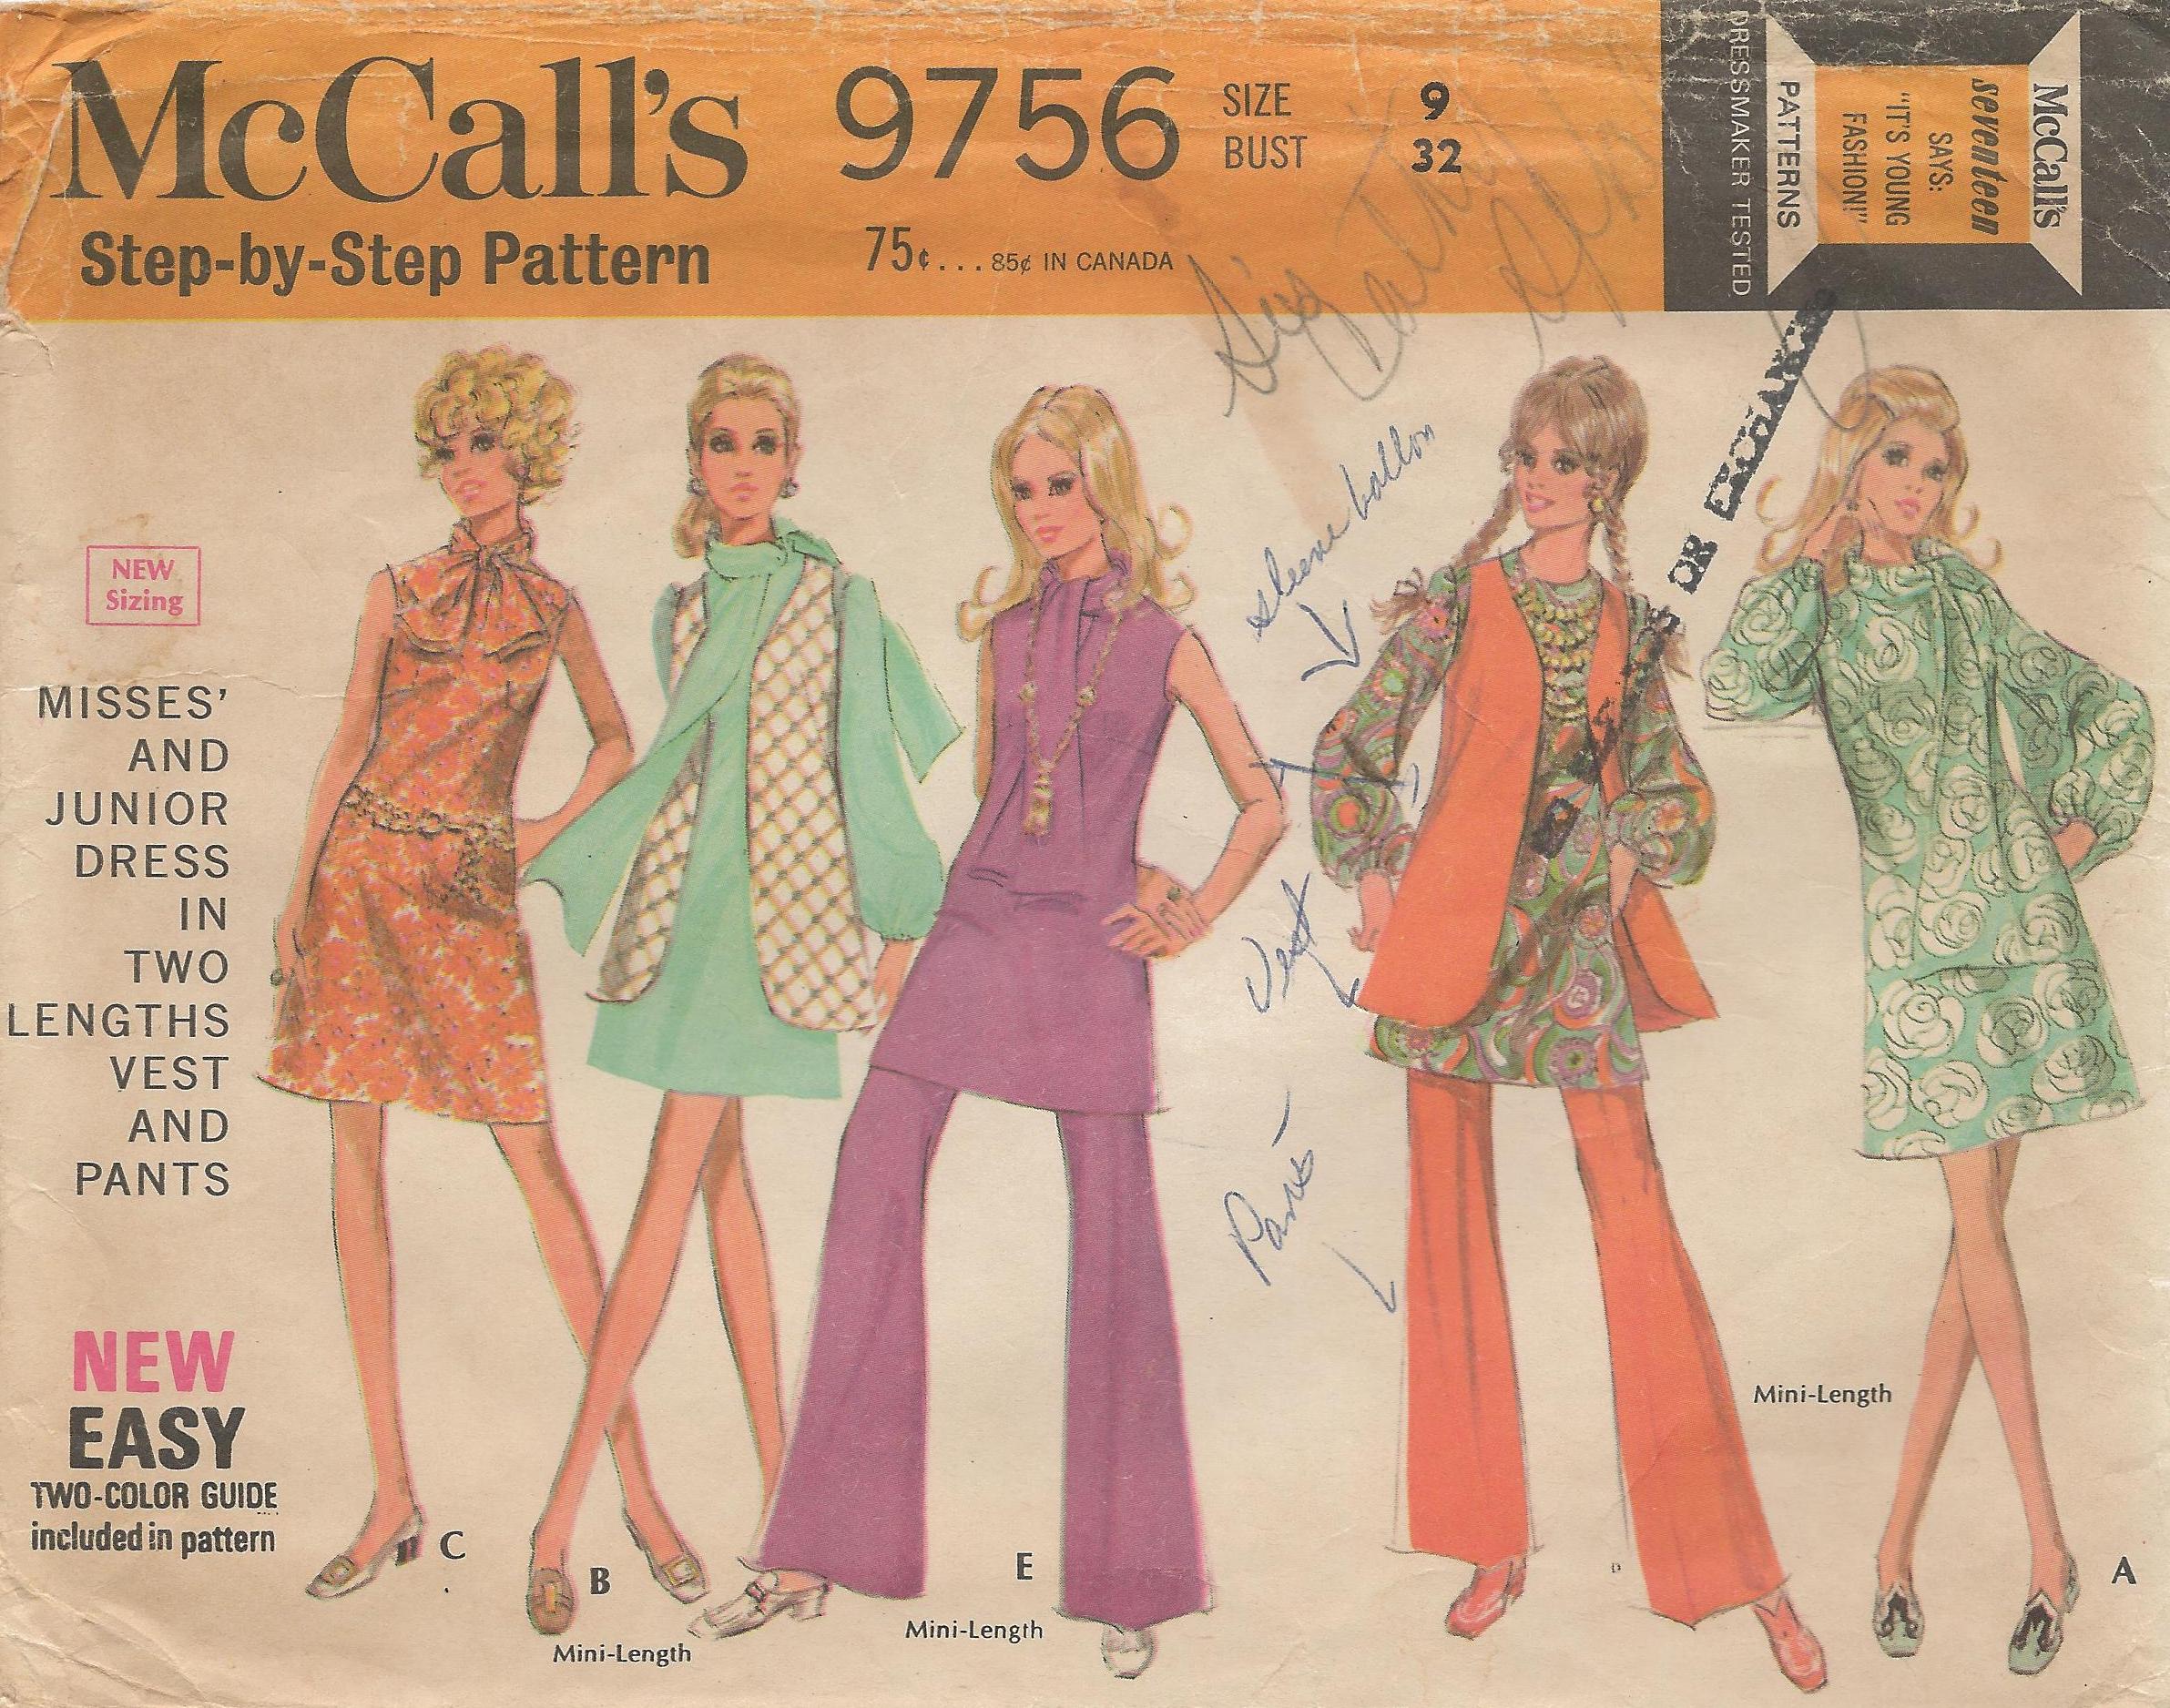 SEWING PATTERN REVIEW: McCalls 8312 gathered dress